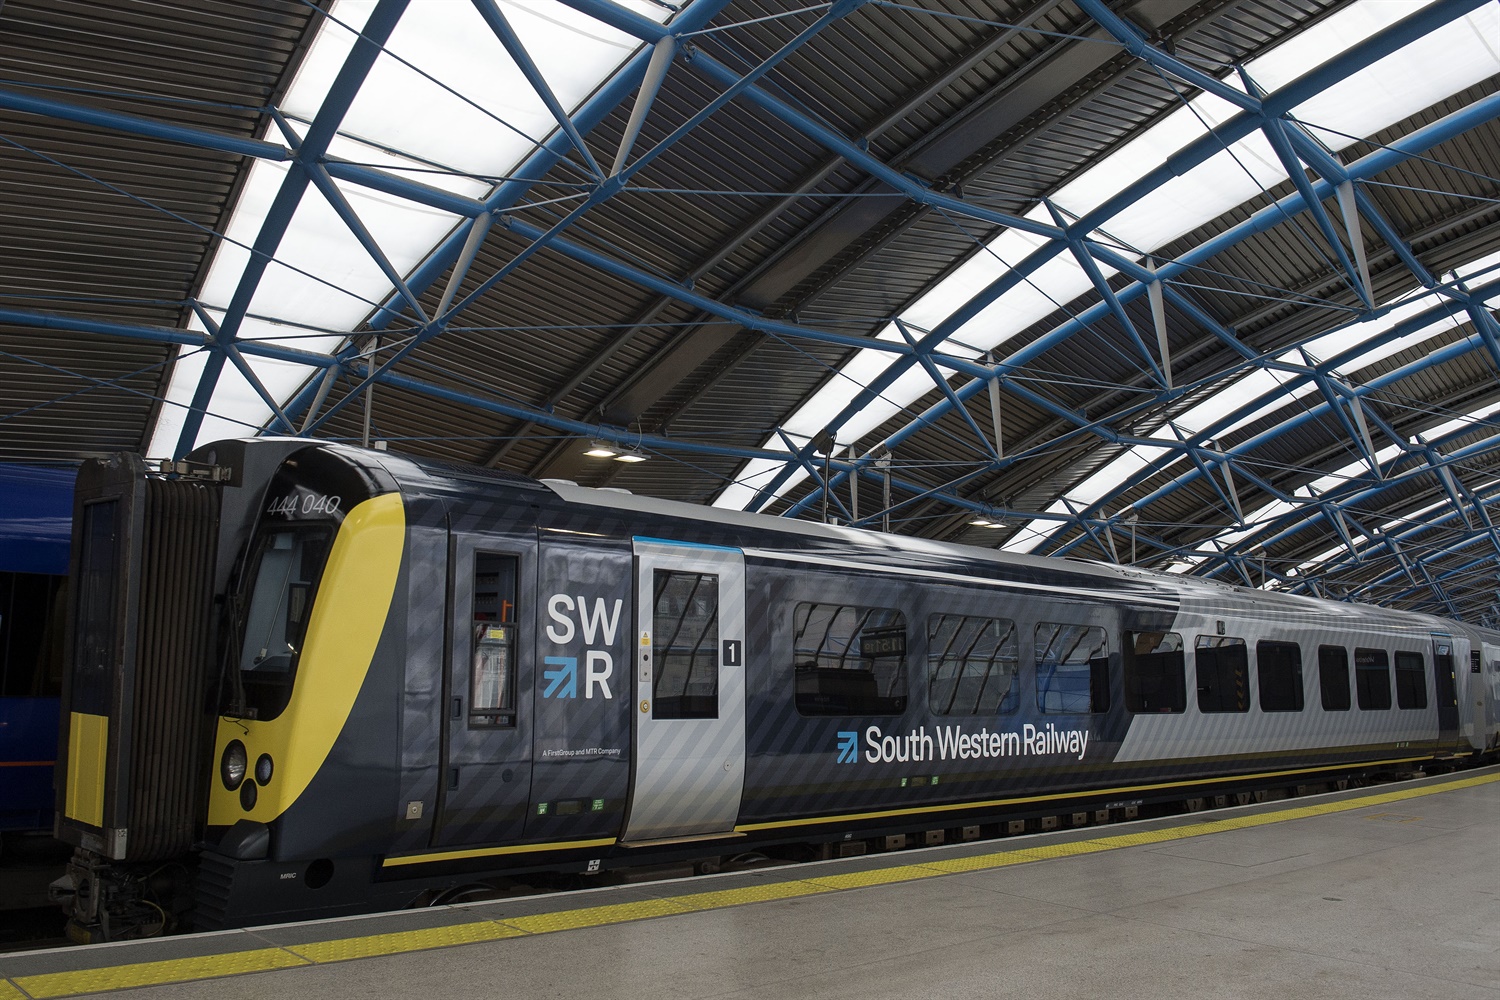 South Western Railway to become UK’s first 5G railway as FirstGroup announces deal for superfast Wi-Fi on trains